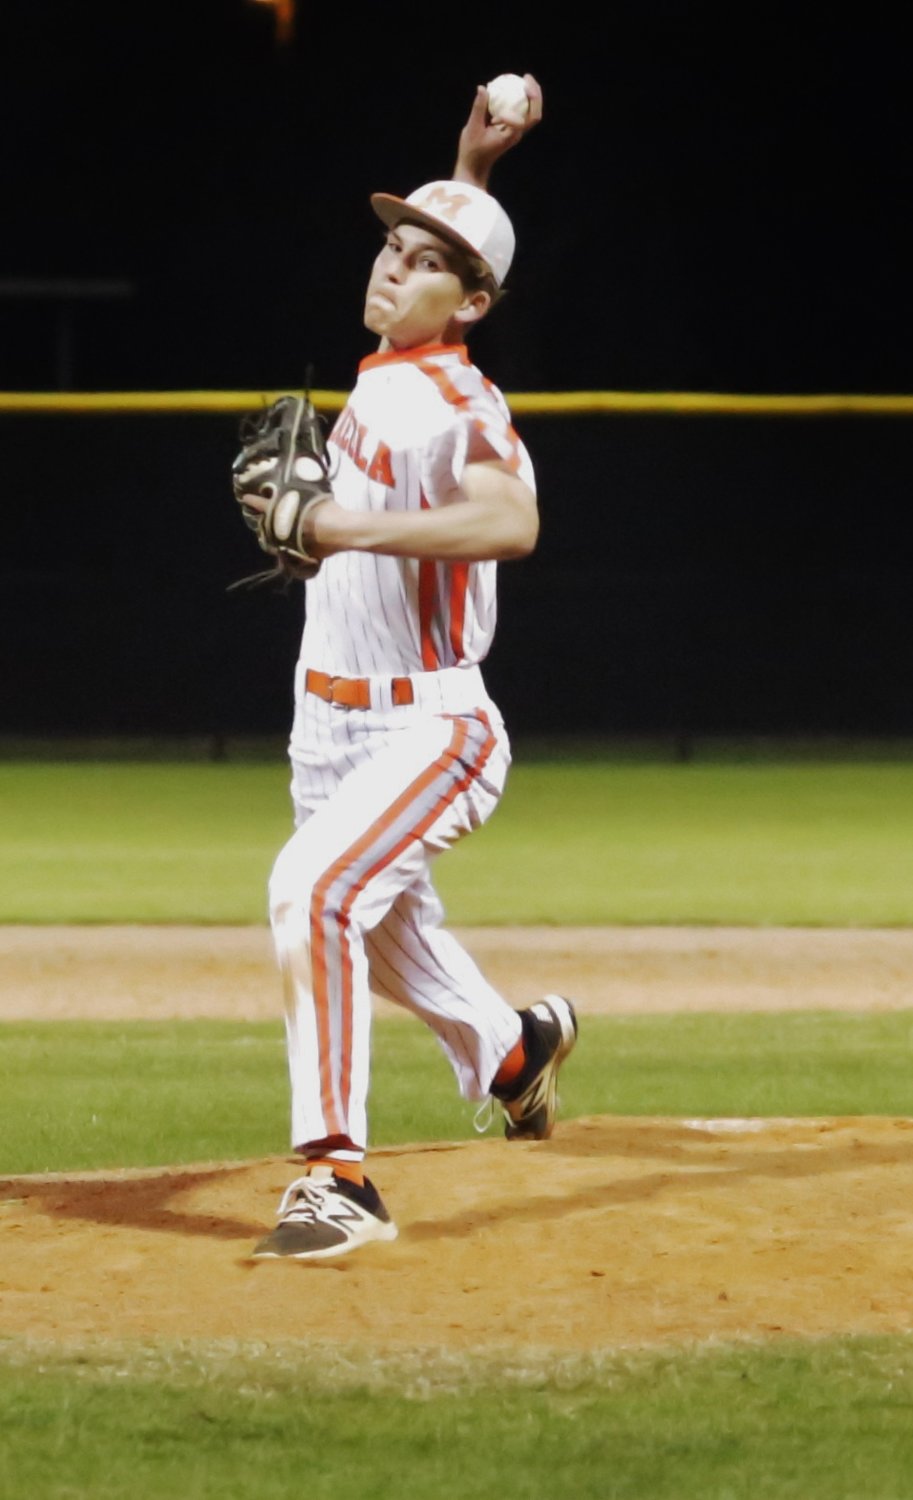 Mineola’s Spencer Joyner got the best of a pitcher's duel with Winnsboro for the district win last Thursday. (Monitor photo by John Arbter)